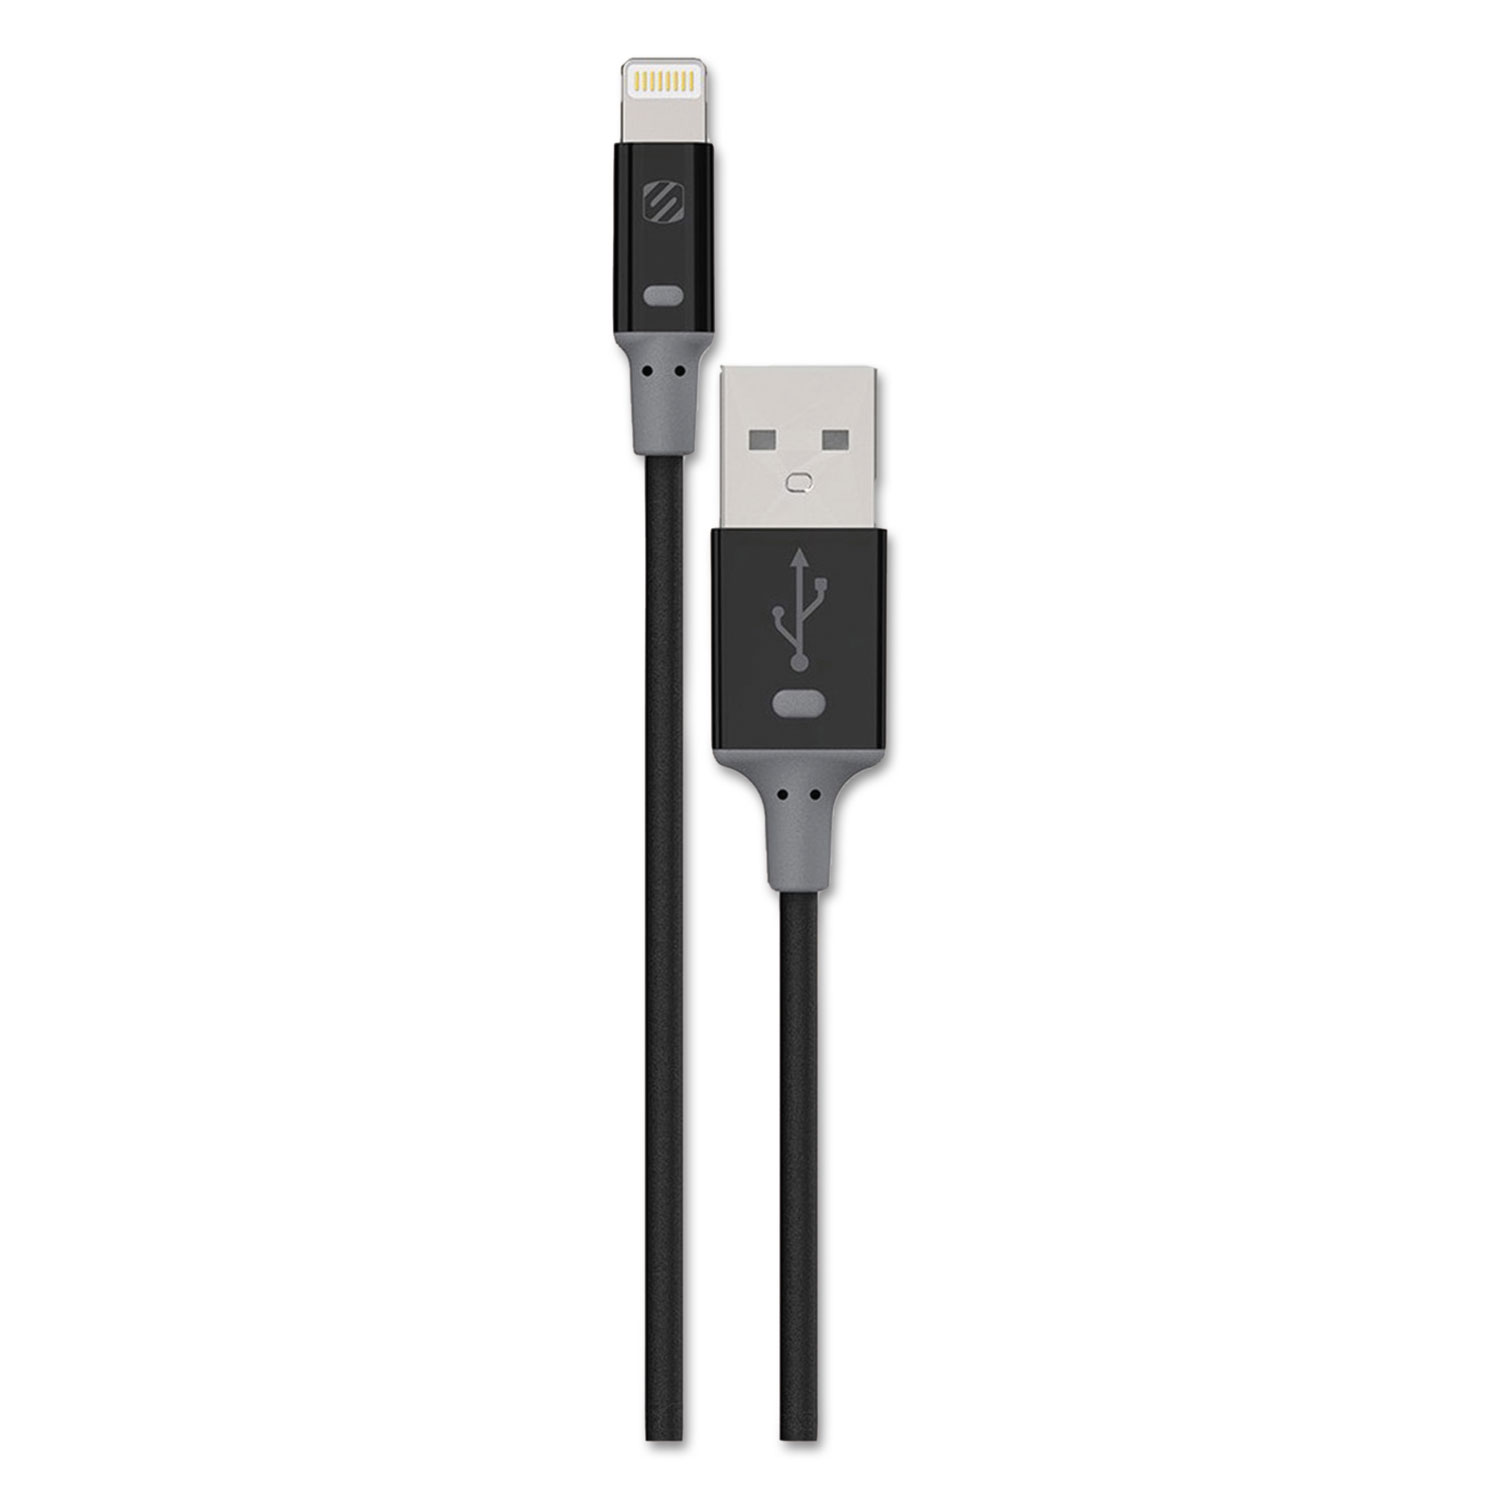  Scosche 12A smartSTRIKE II Charge & Sync Cable for Lightning USB Devices, Black (SOS12A) 